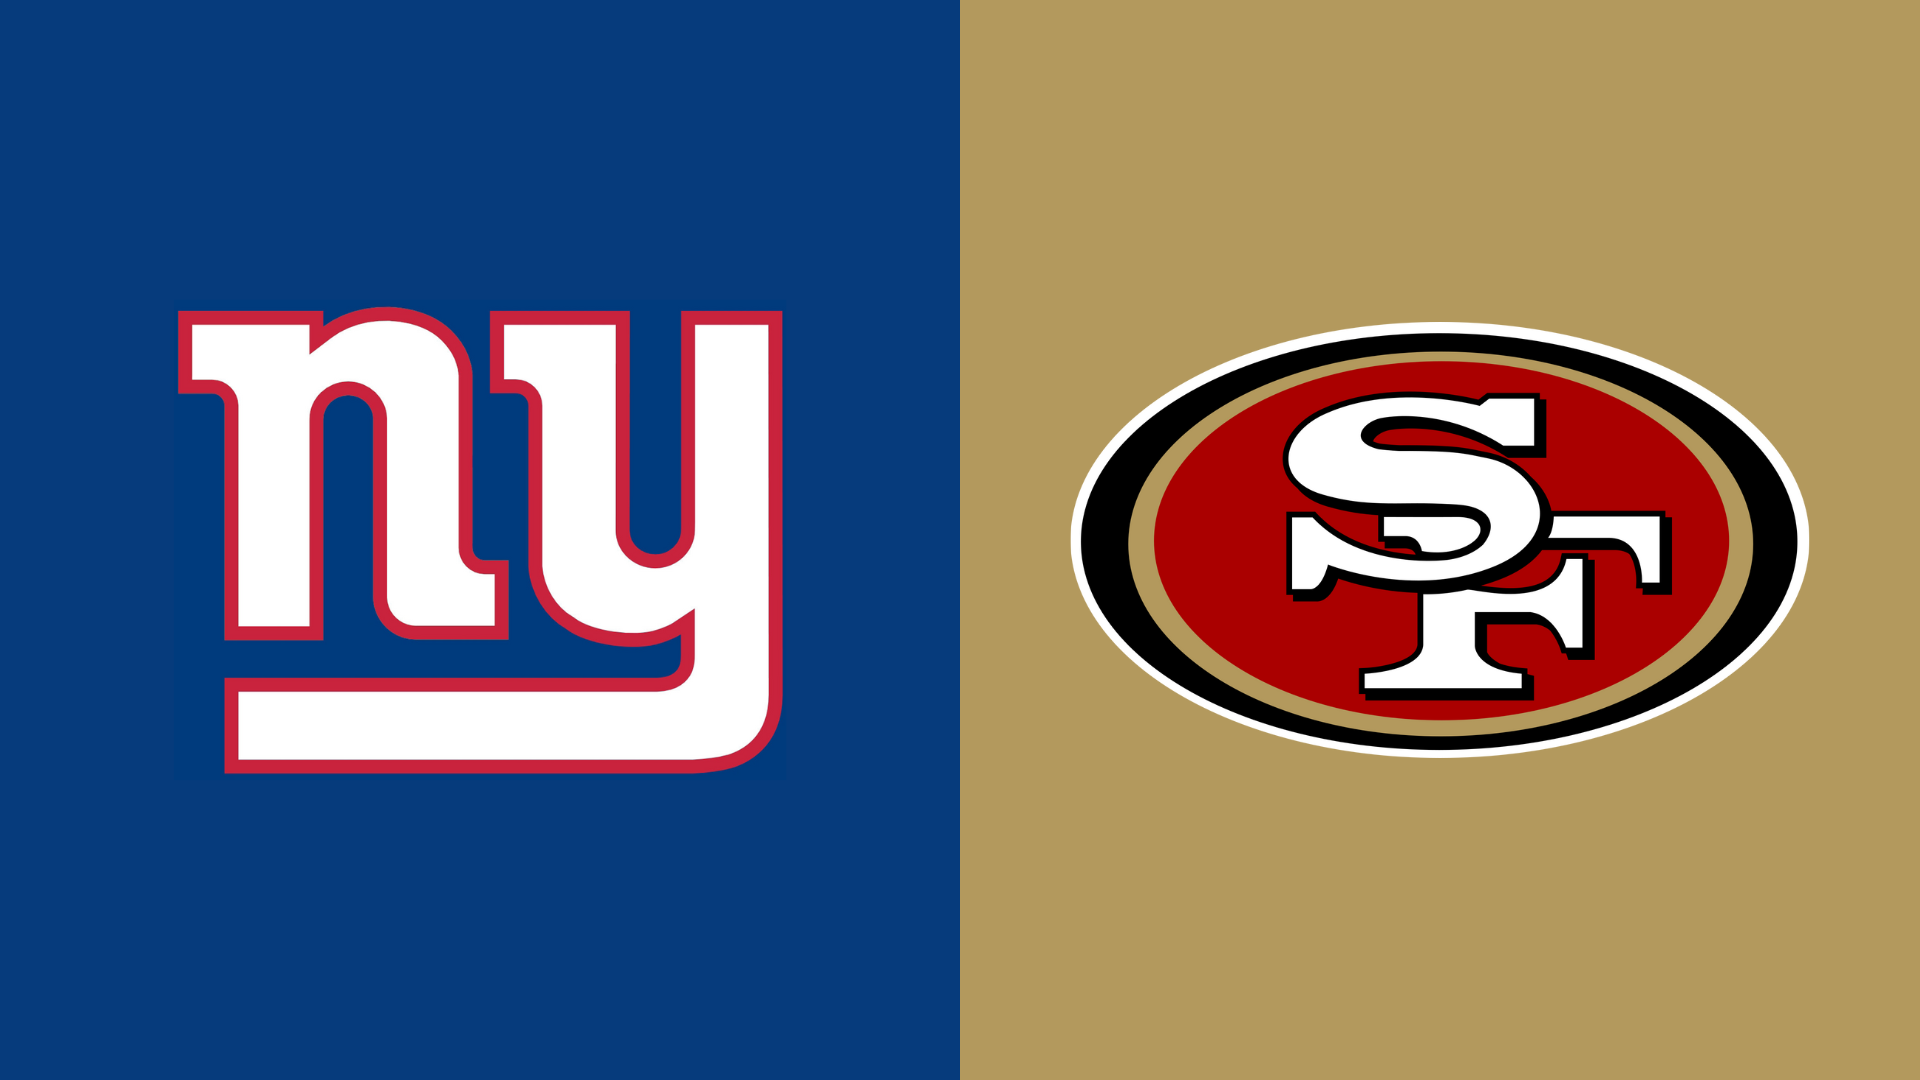 Giants vs 49ers NFL Week 3 Thursday Night Football picks and predictions -  The Falcoholic